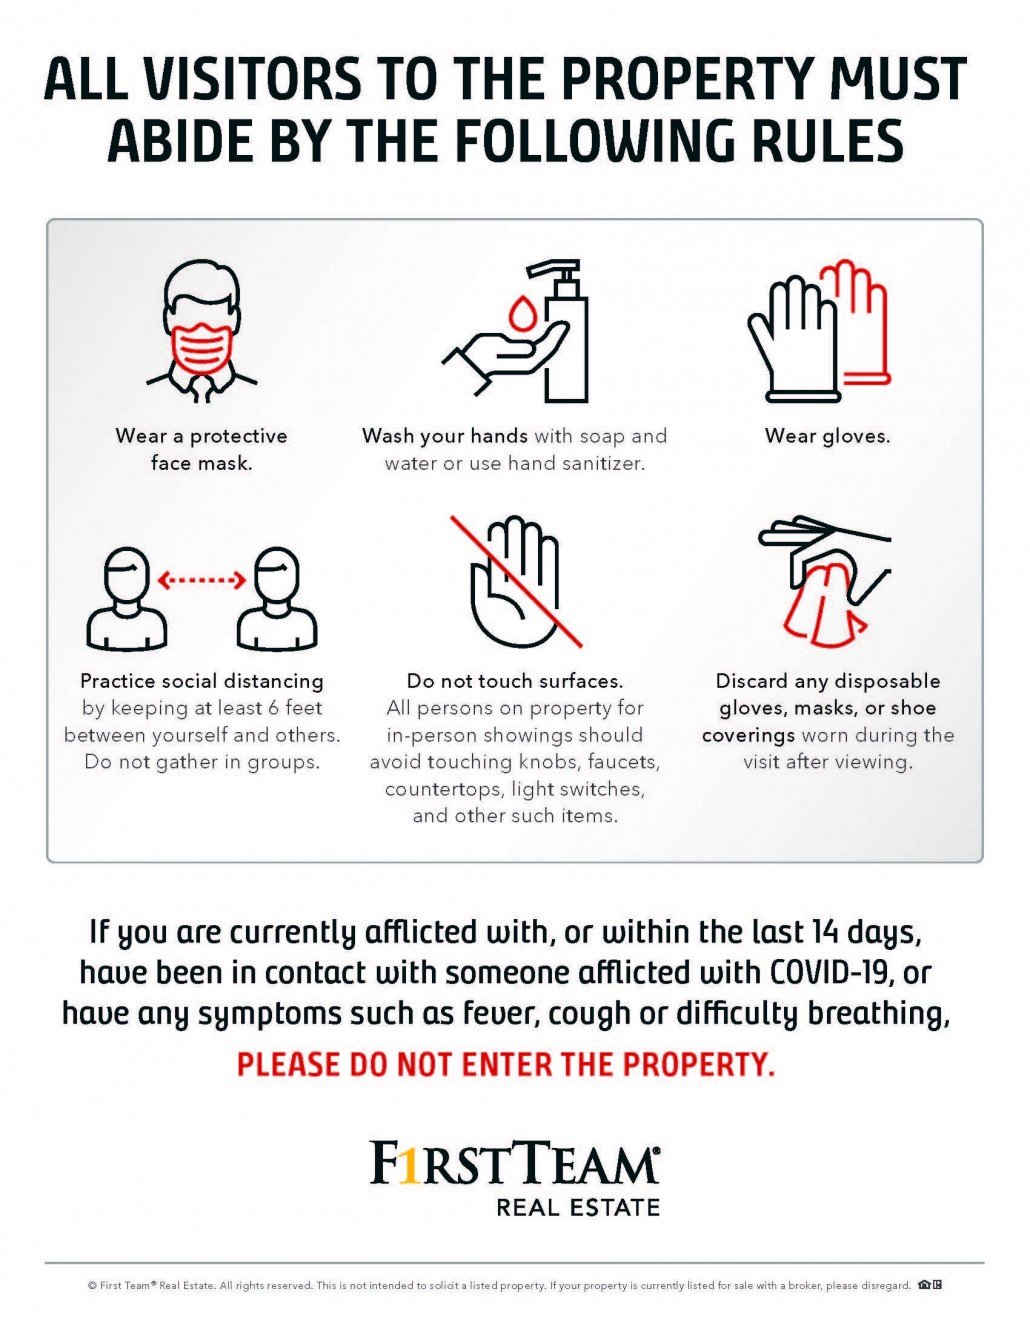 Flyer Of Safety Precautions Amid Covid-19 That Home Sellers Are Legally Obligated To Visibly Post.